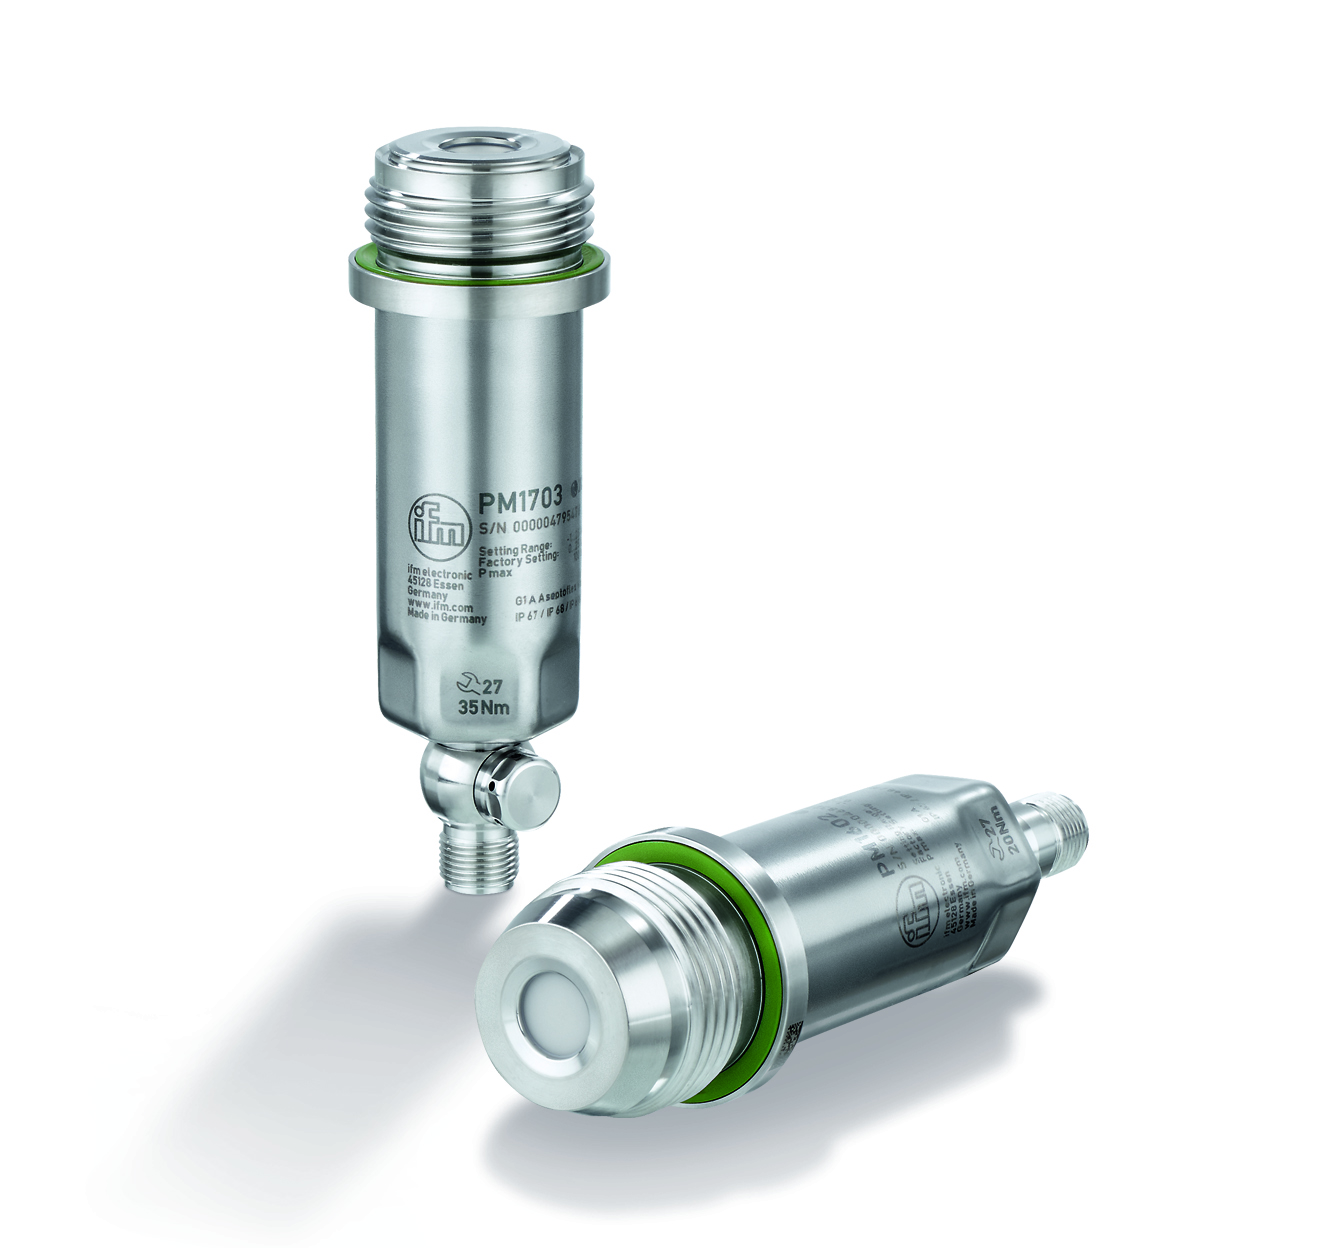 The PM16 series of pressure transmitters provides a total accuracy of 0.2%.